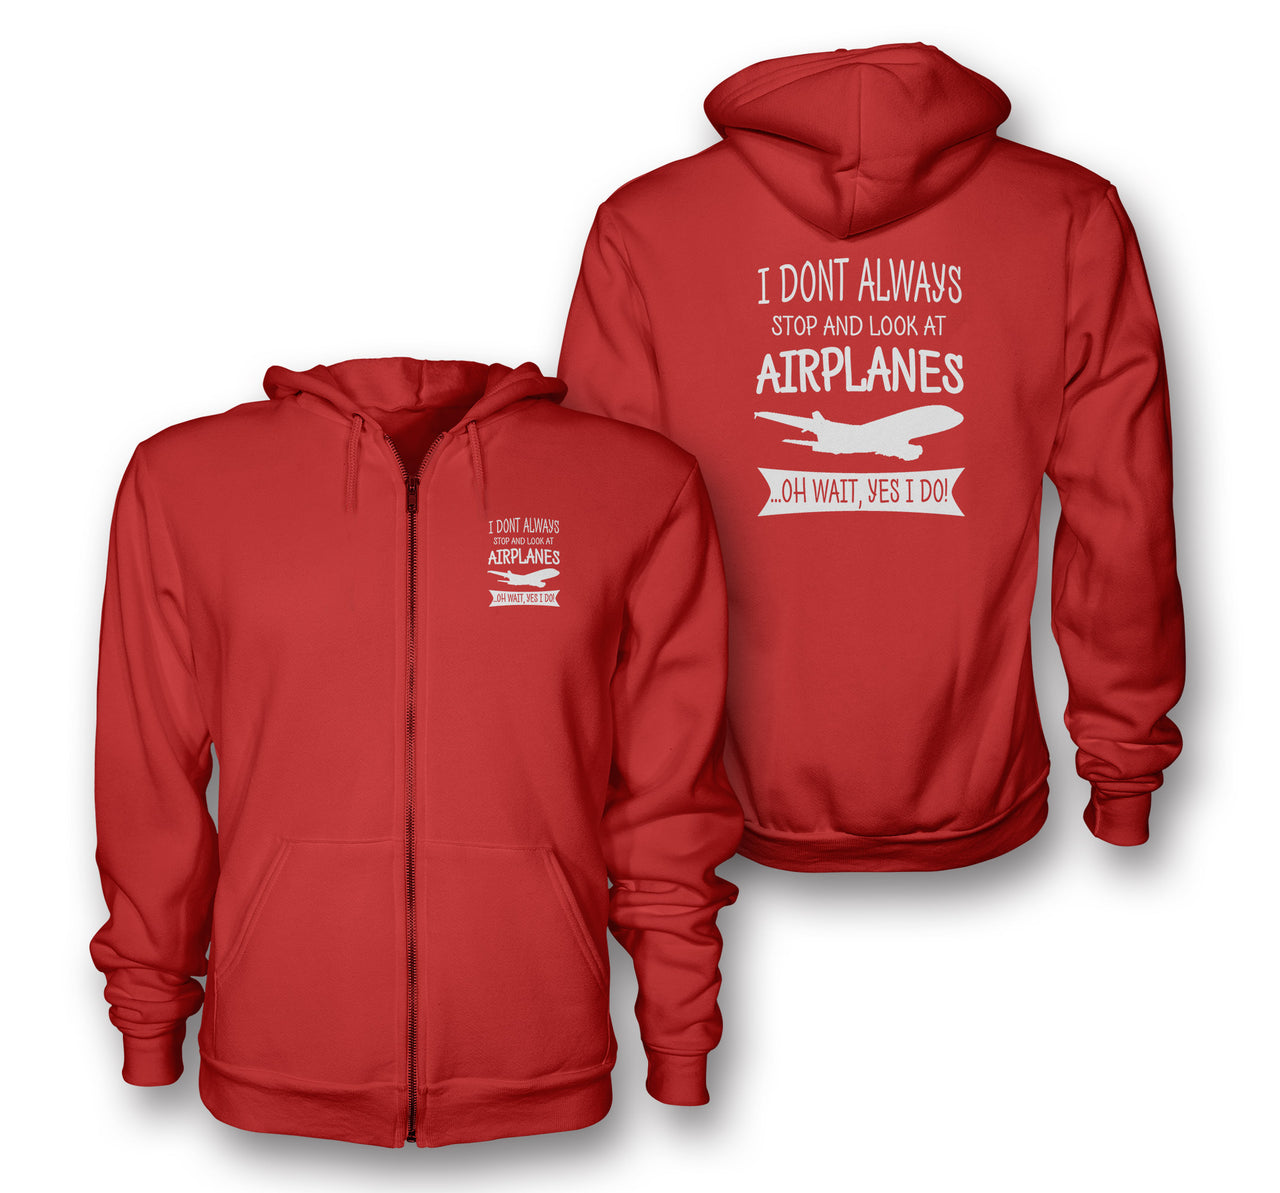 I Don't Always Stop and Look at Airplanes Designed Zipped Hoodies